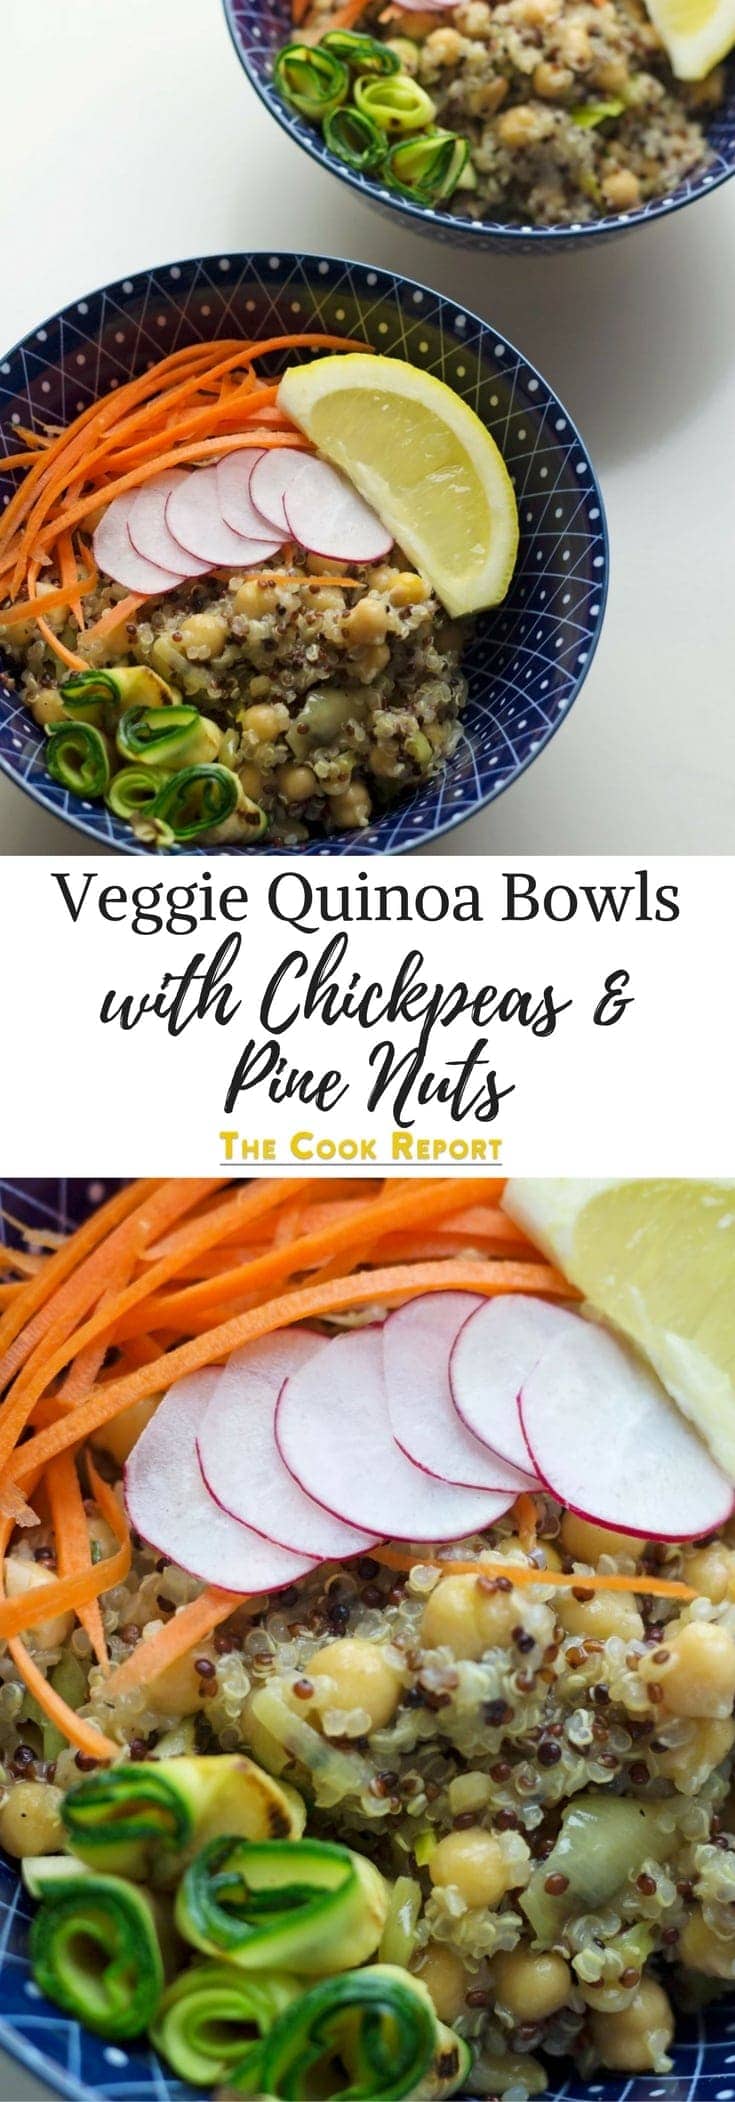 These protein-packed veggie quinoa bowls will keep you full for hours. Look no further for a super healthy vegetarian dinner!